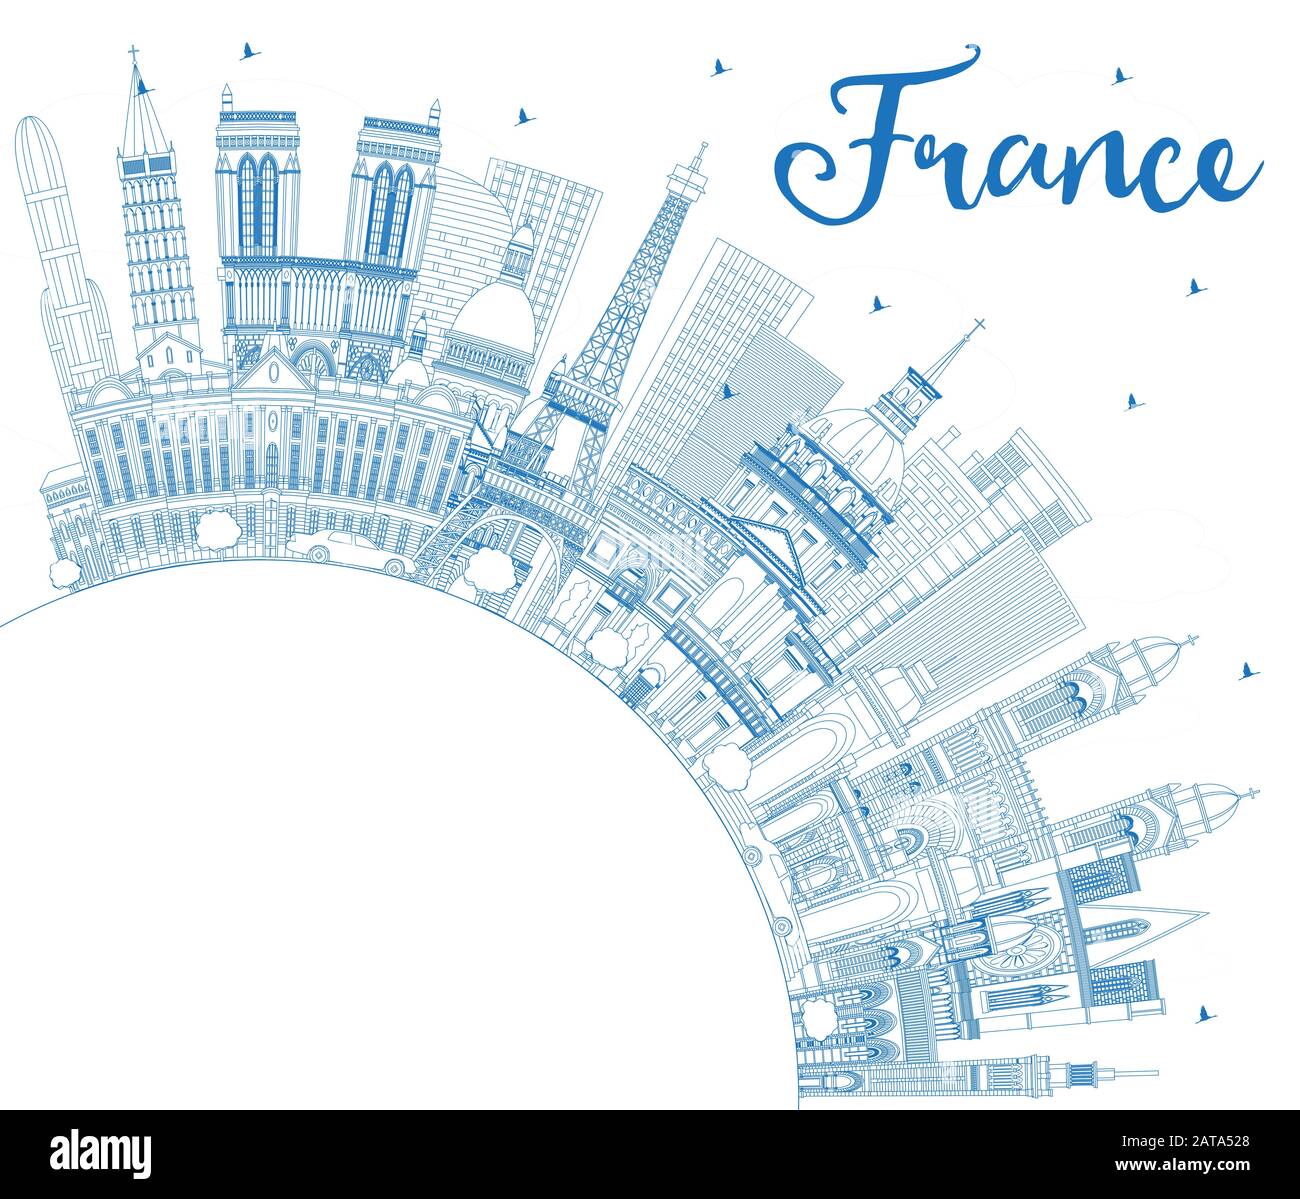 Outline France City Skyline with Blue Buildings and Copy Space. Vector Illustration. Tourism Concept with Historic Architecture. France Cityscape. Stock Vector